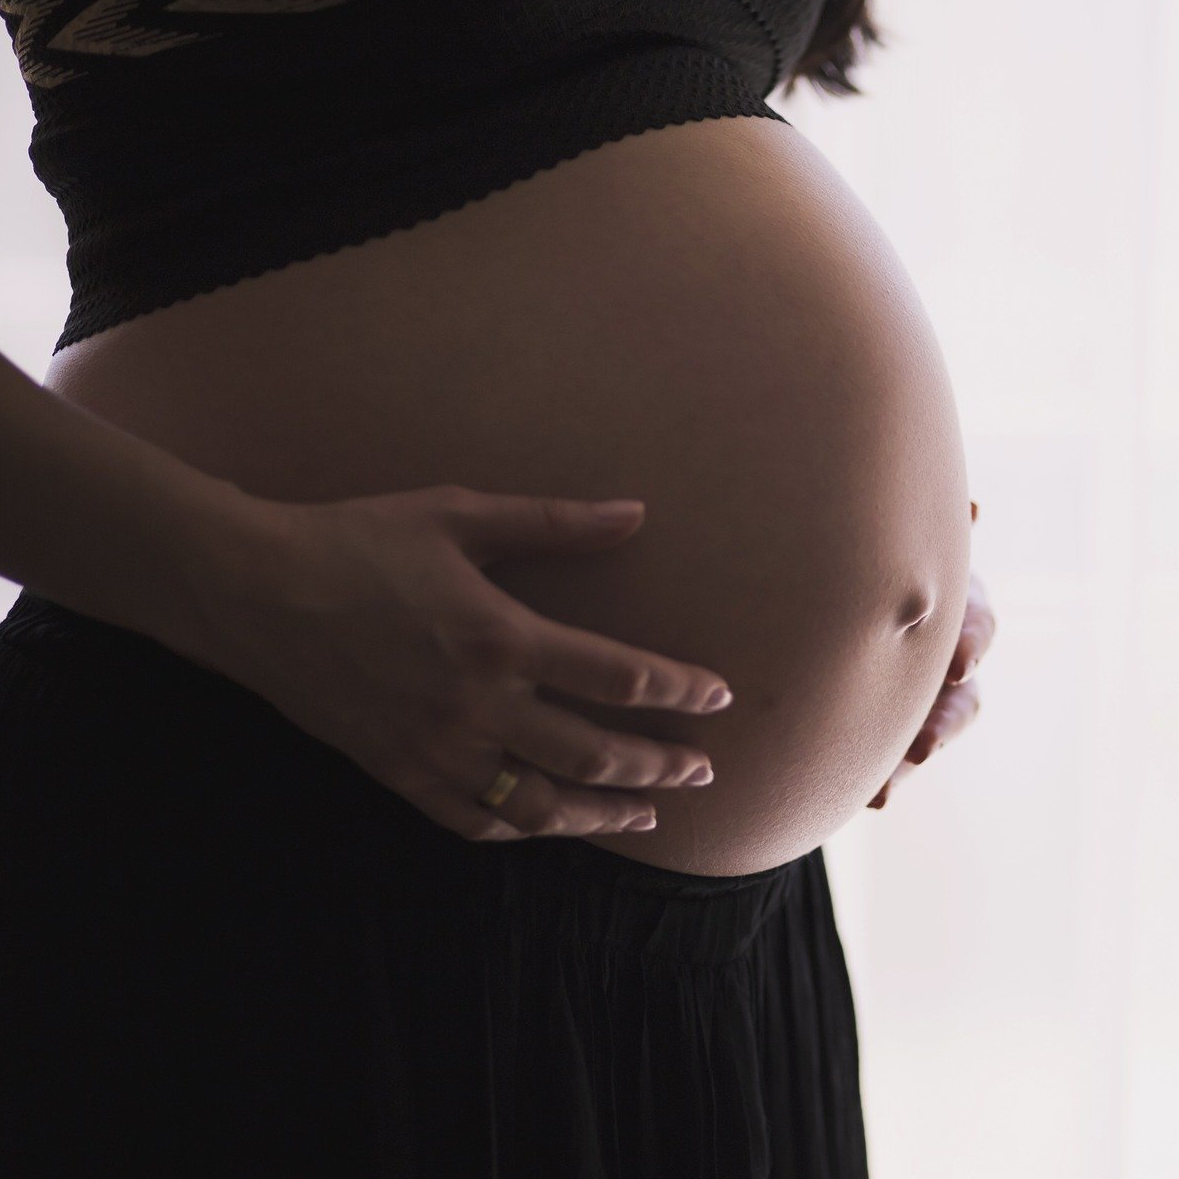 Insurance Affects Low-Income Pregnant, Postpartum Women